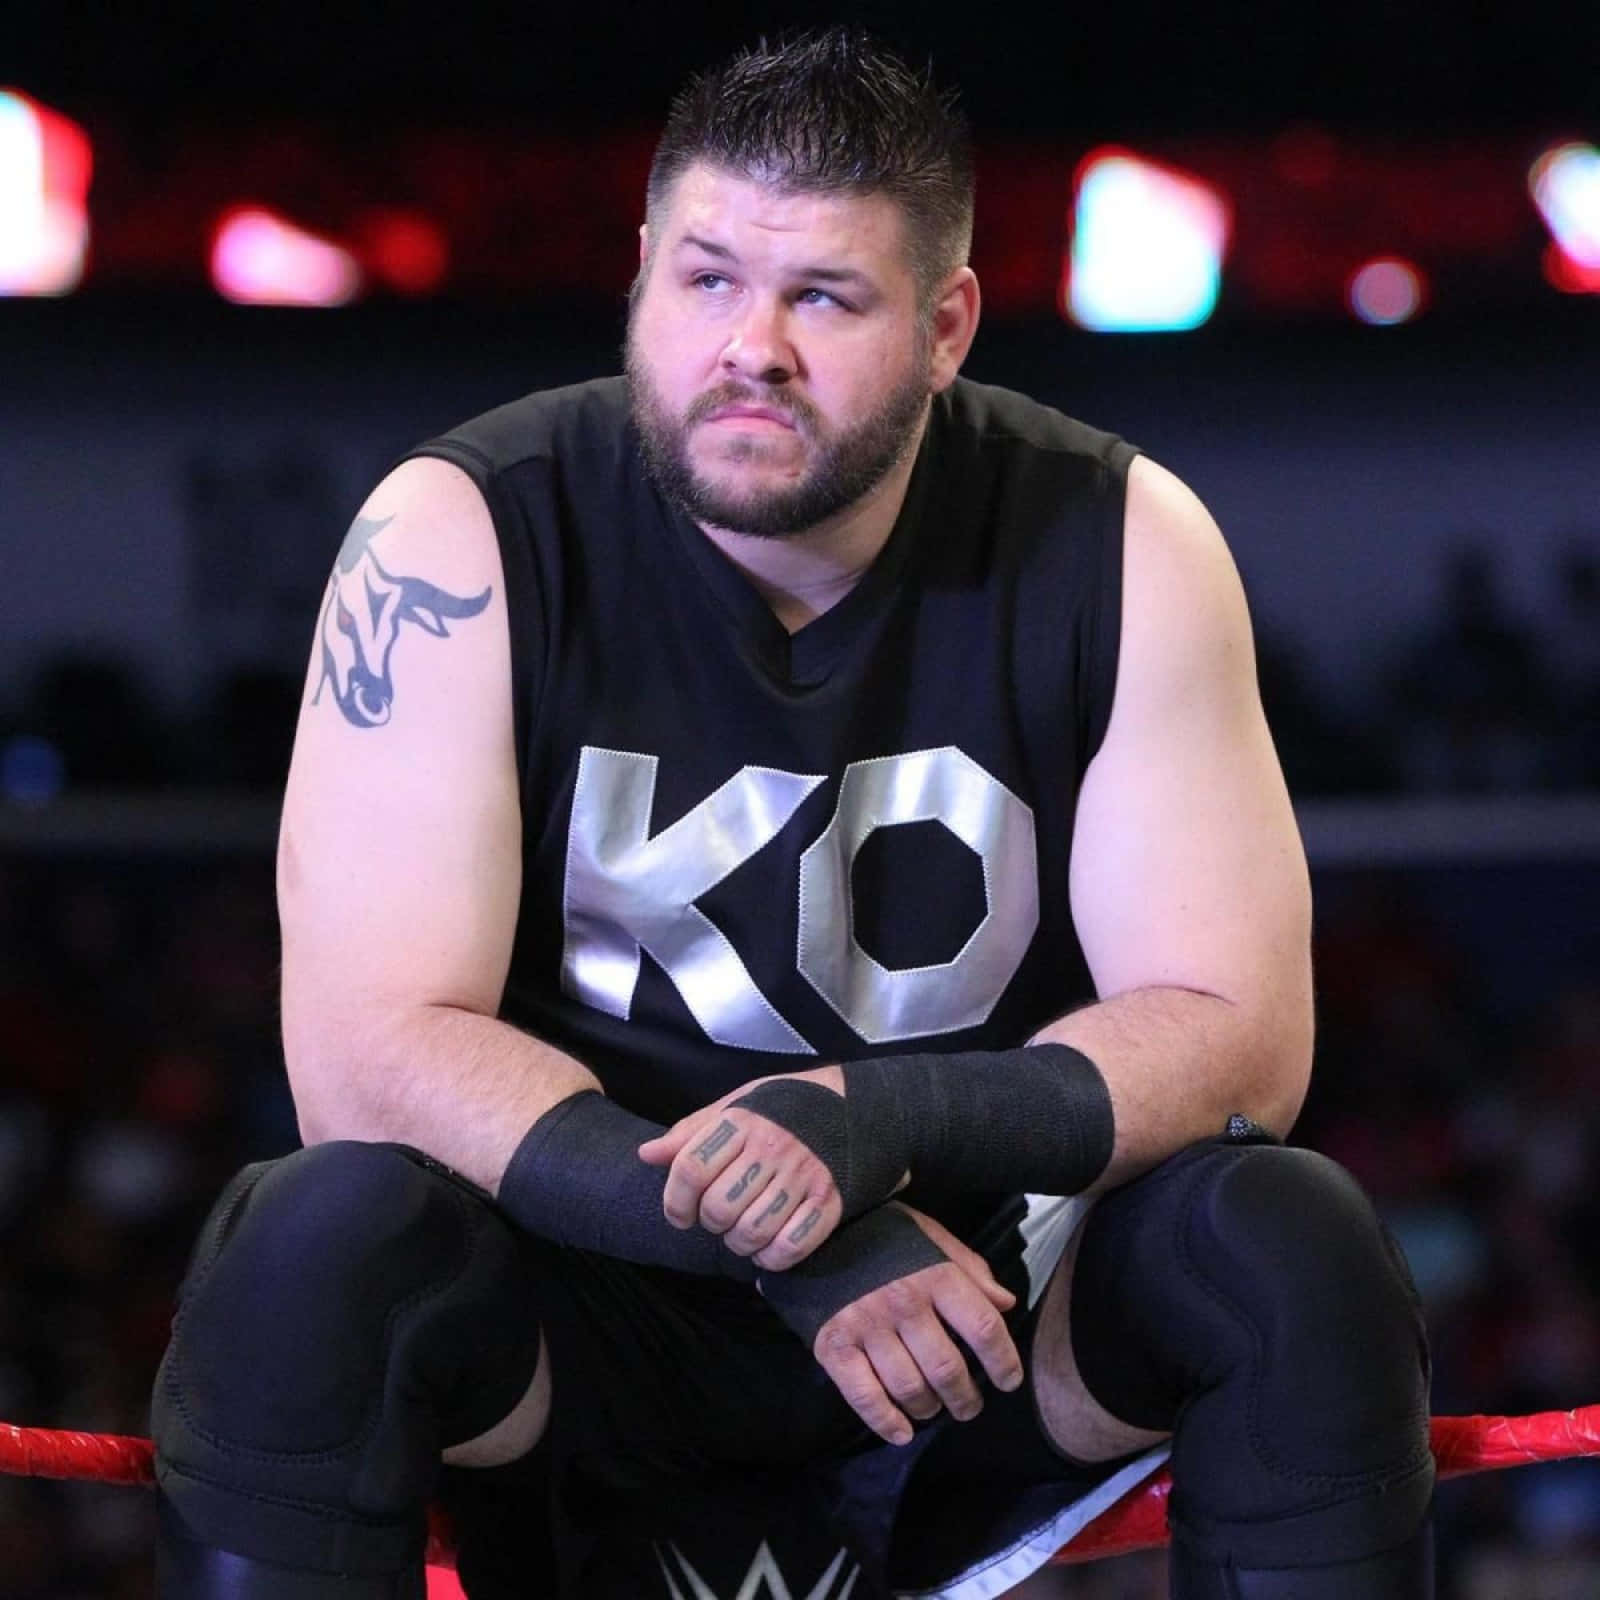 Thrilling Moment In The Ring With Kevin Owens Background